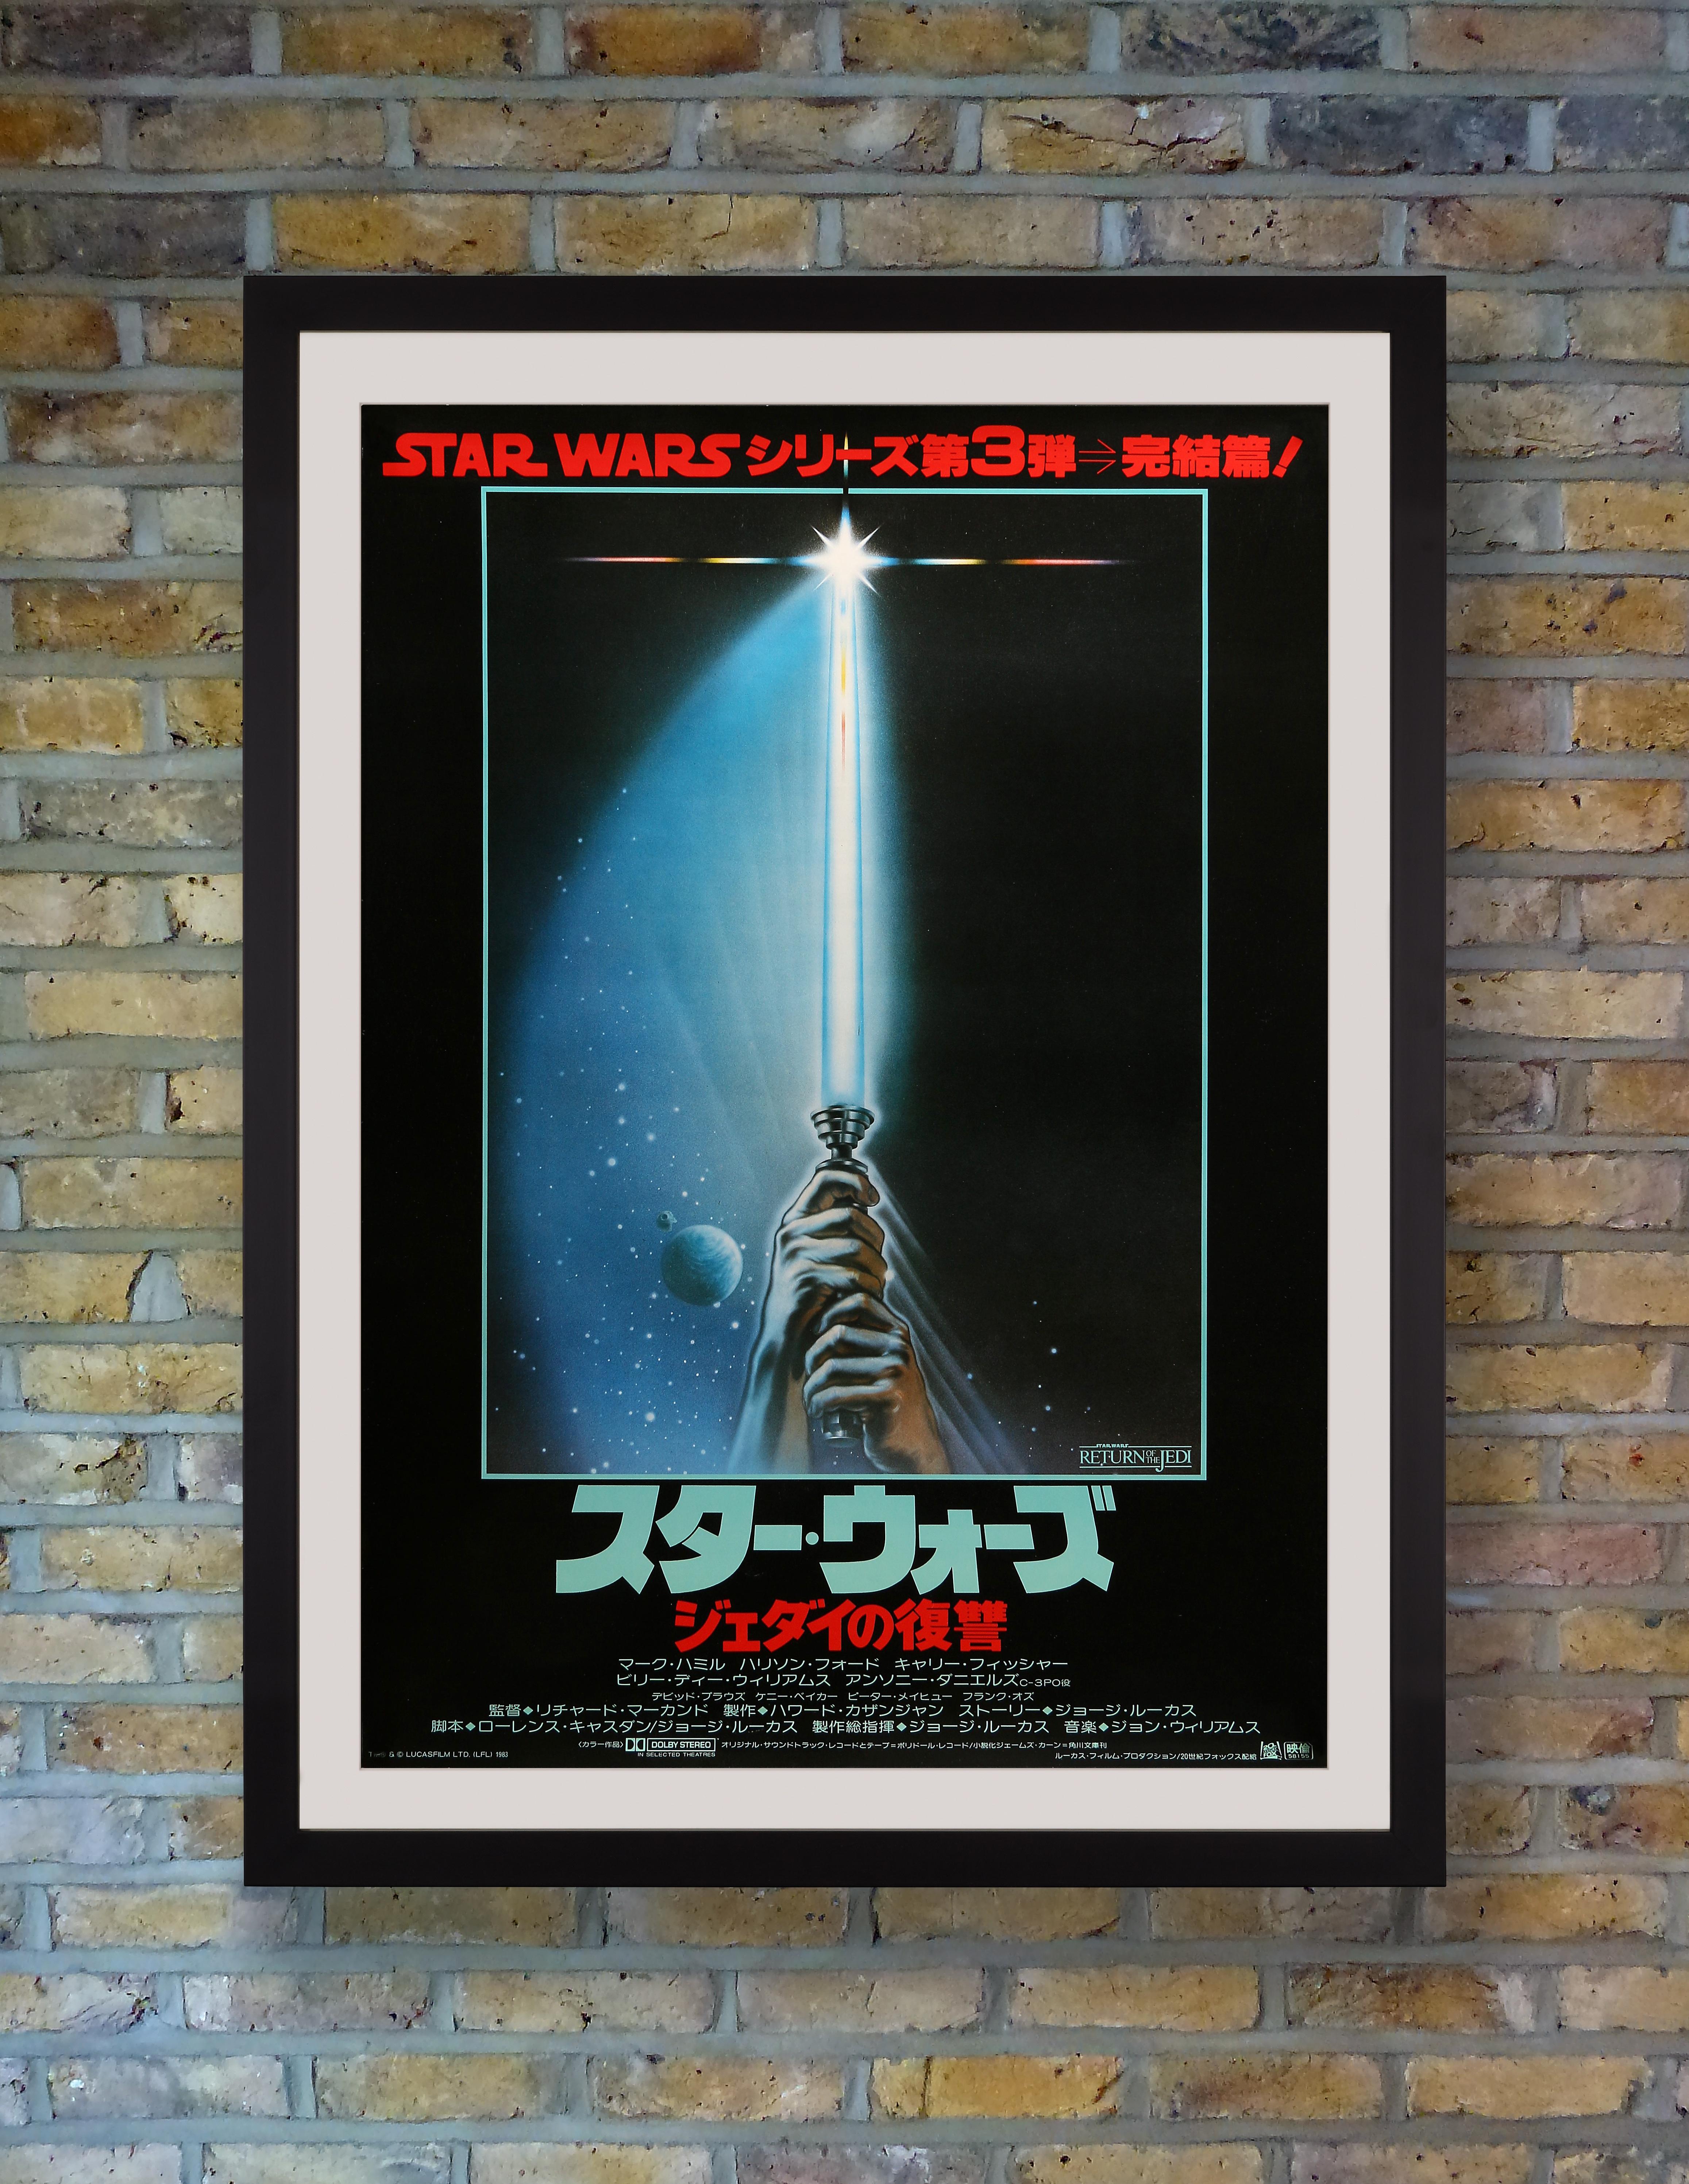 This Japanese poster for 'Return of the Jedi' uses the same Tim Reamer artwork as the US Campaign. The simple and effective design for the final instalment of George Lucas' original Star Wars trilogy has become emblematic of the entire saga, with